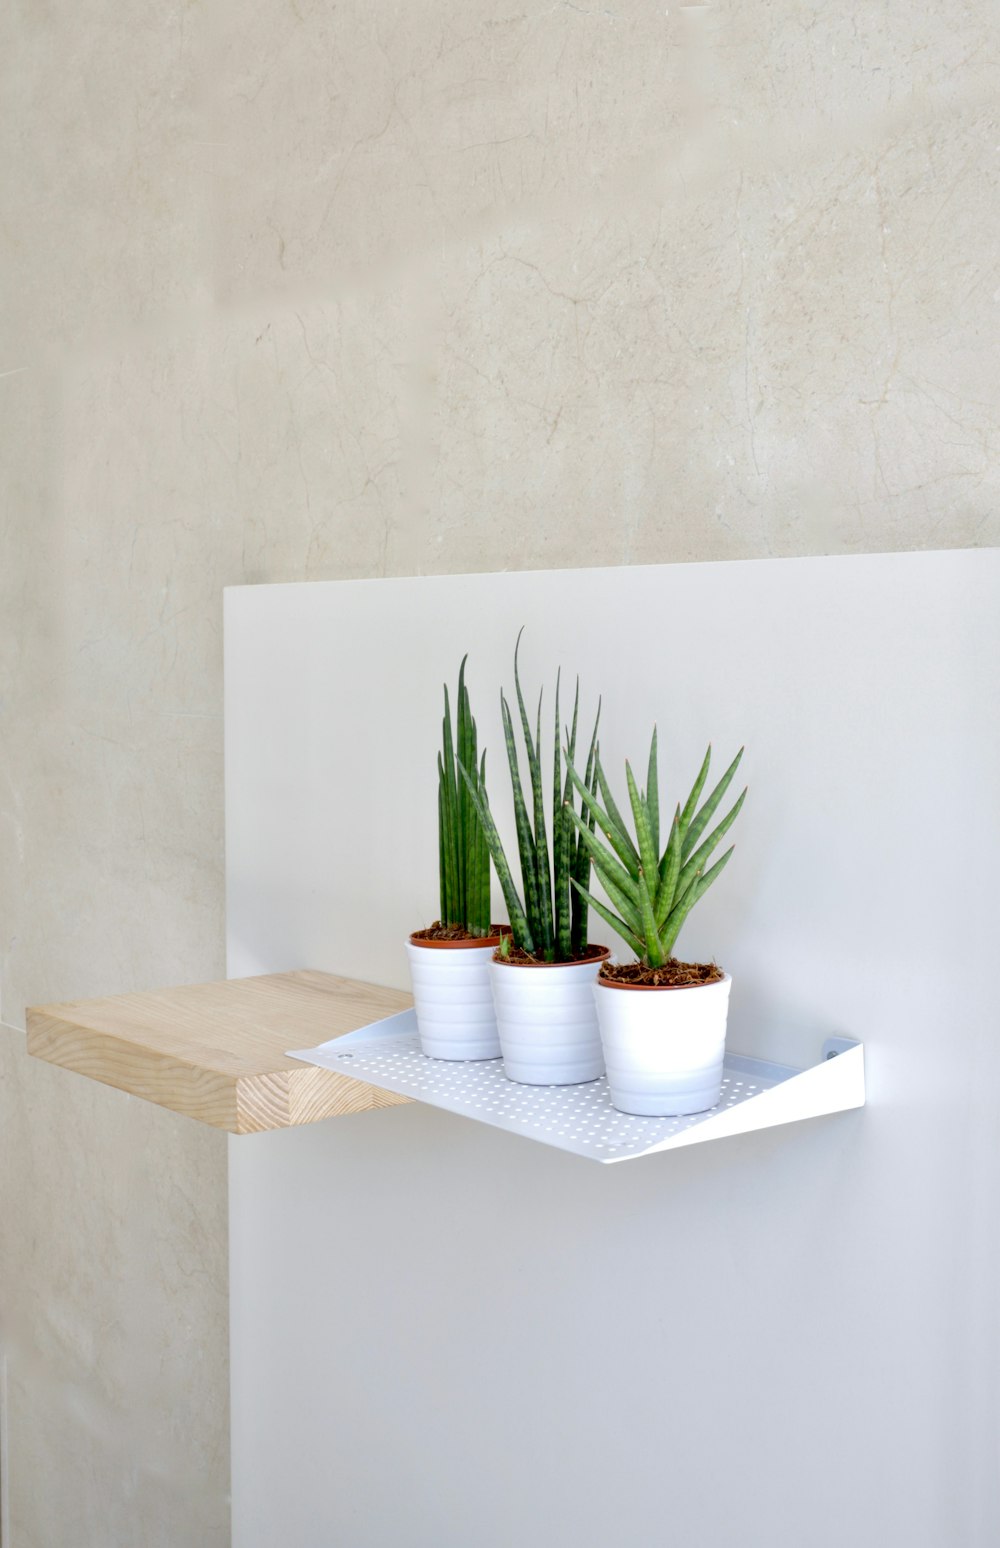 green plant on white ceramic pot on brown wooden table